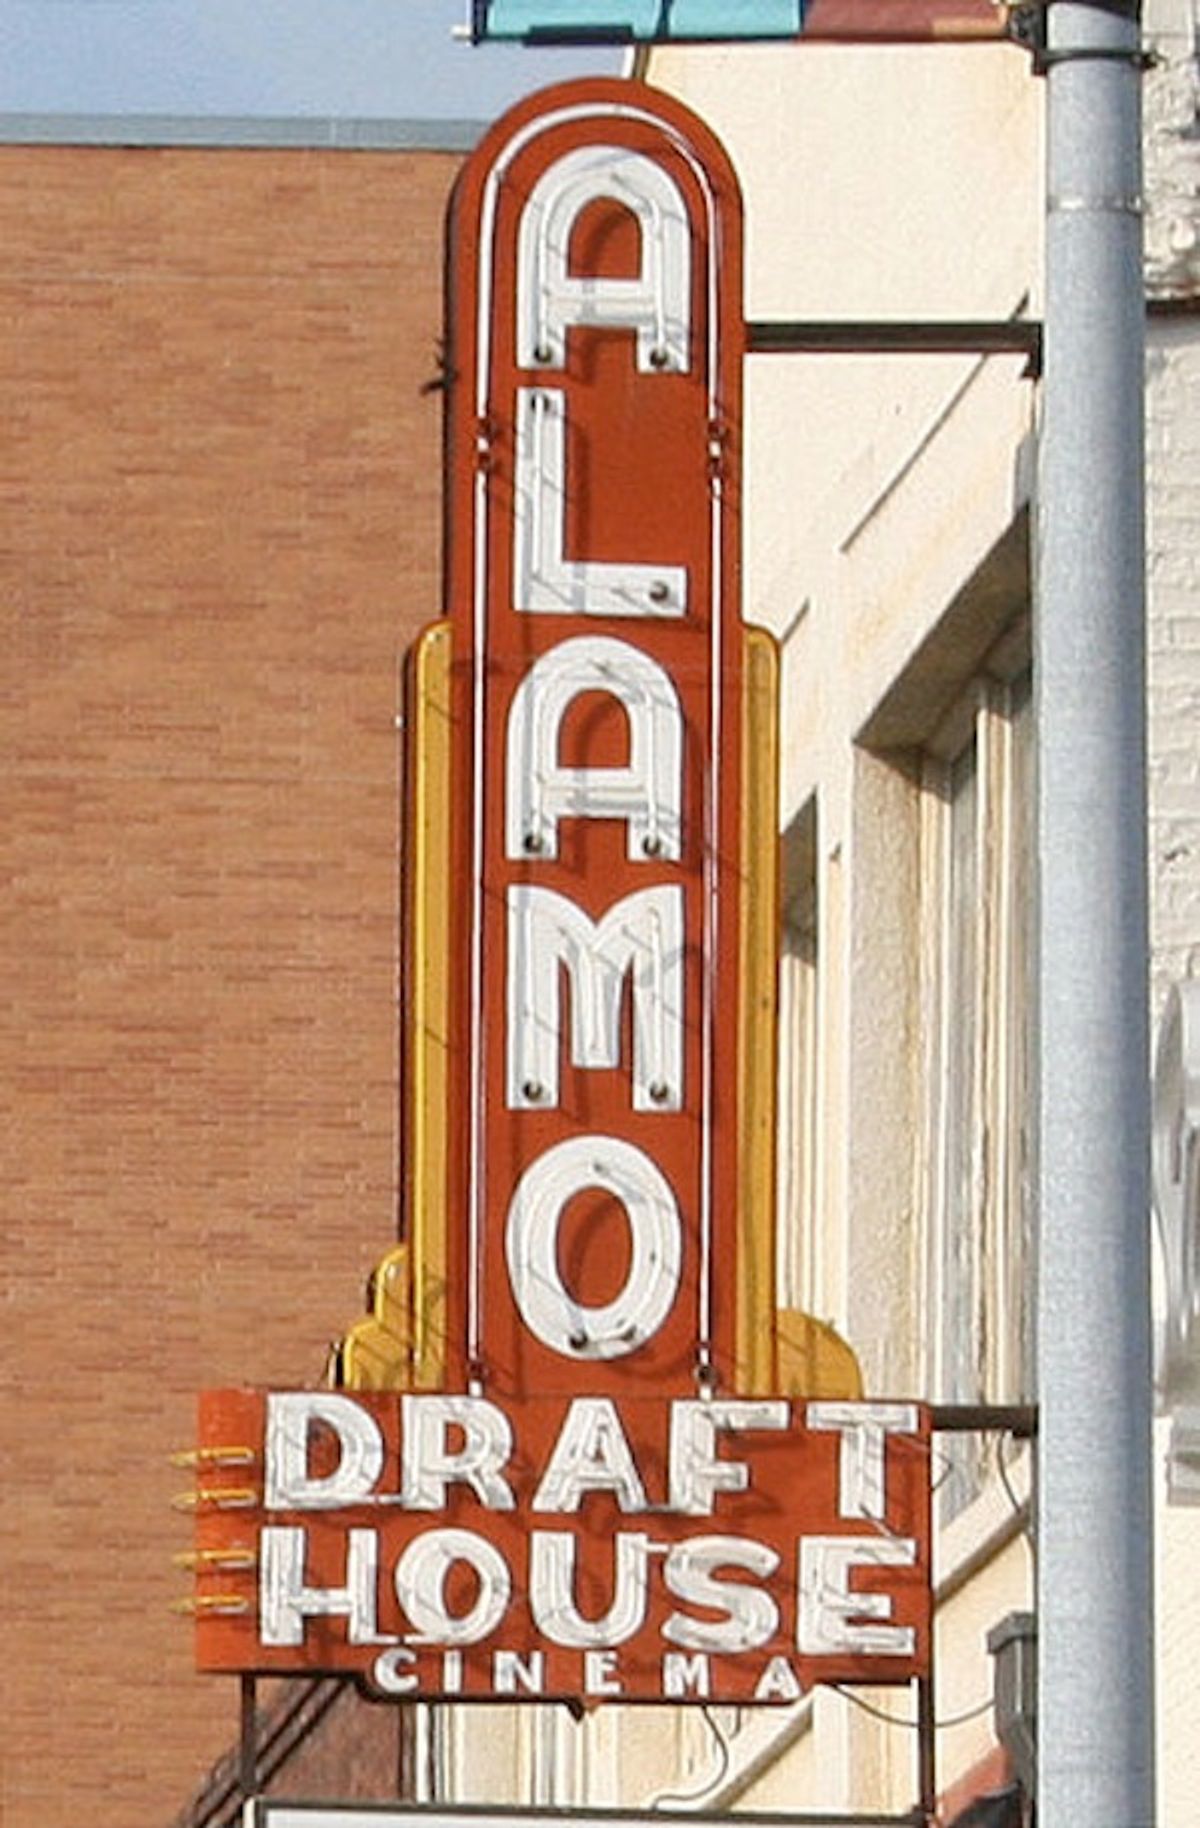 Remember the Alamo ... and its cinema's policy regarding text messaging.